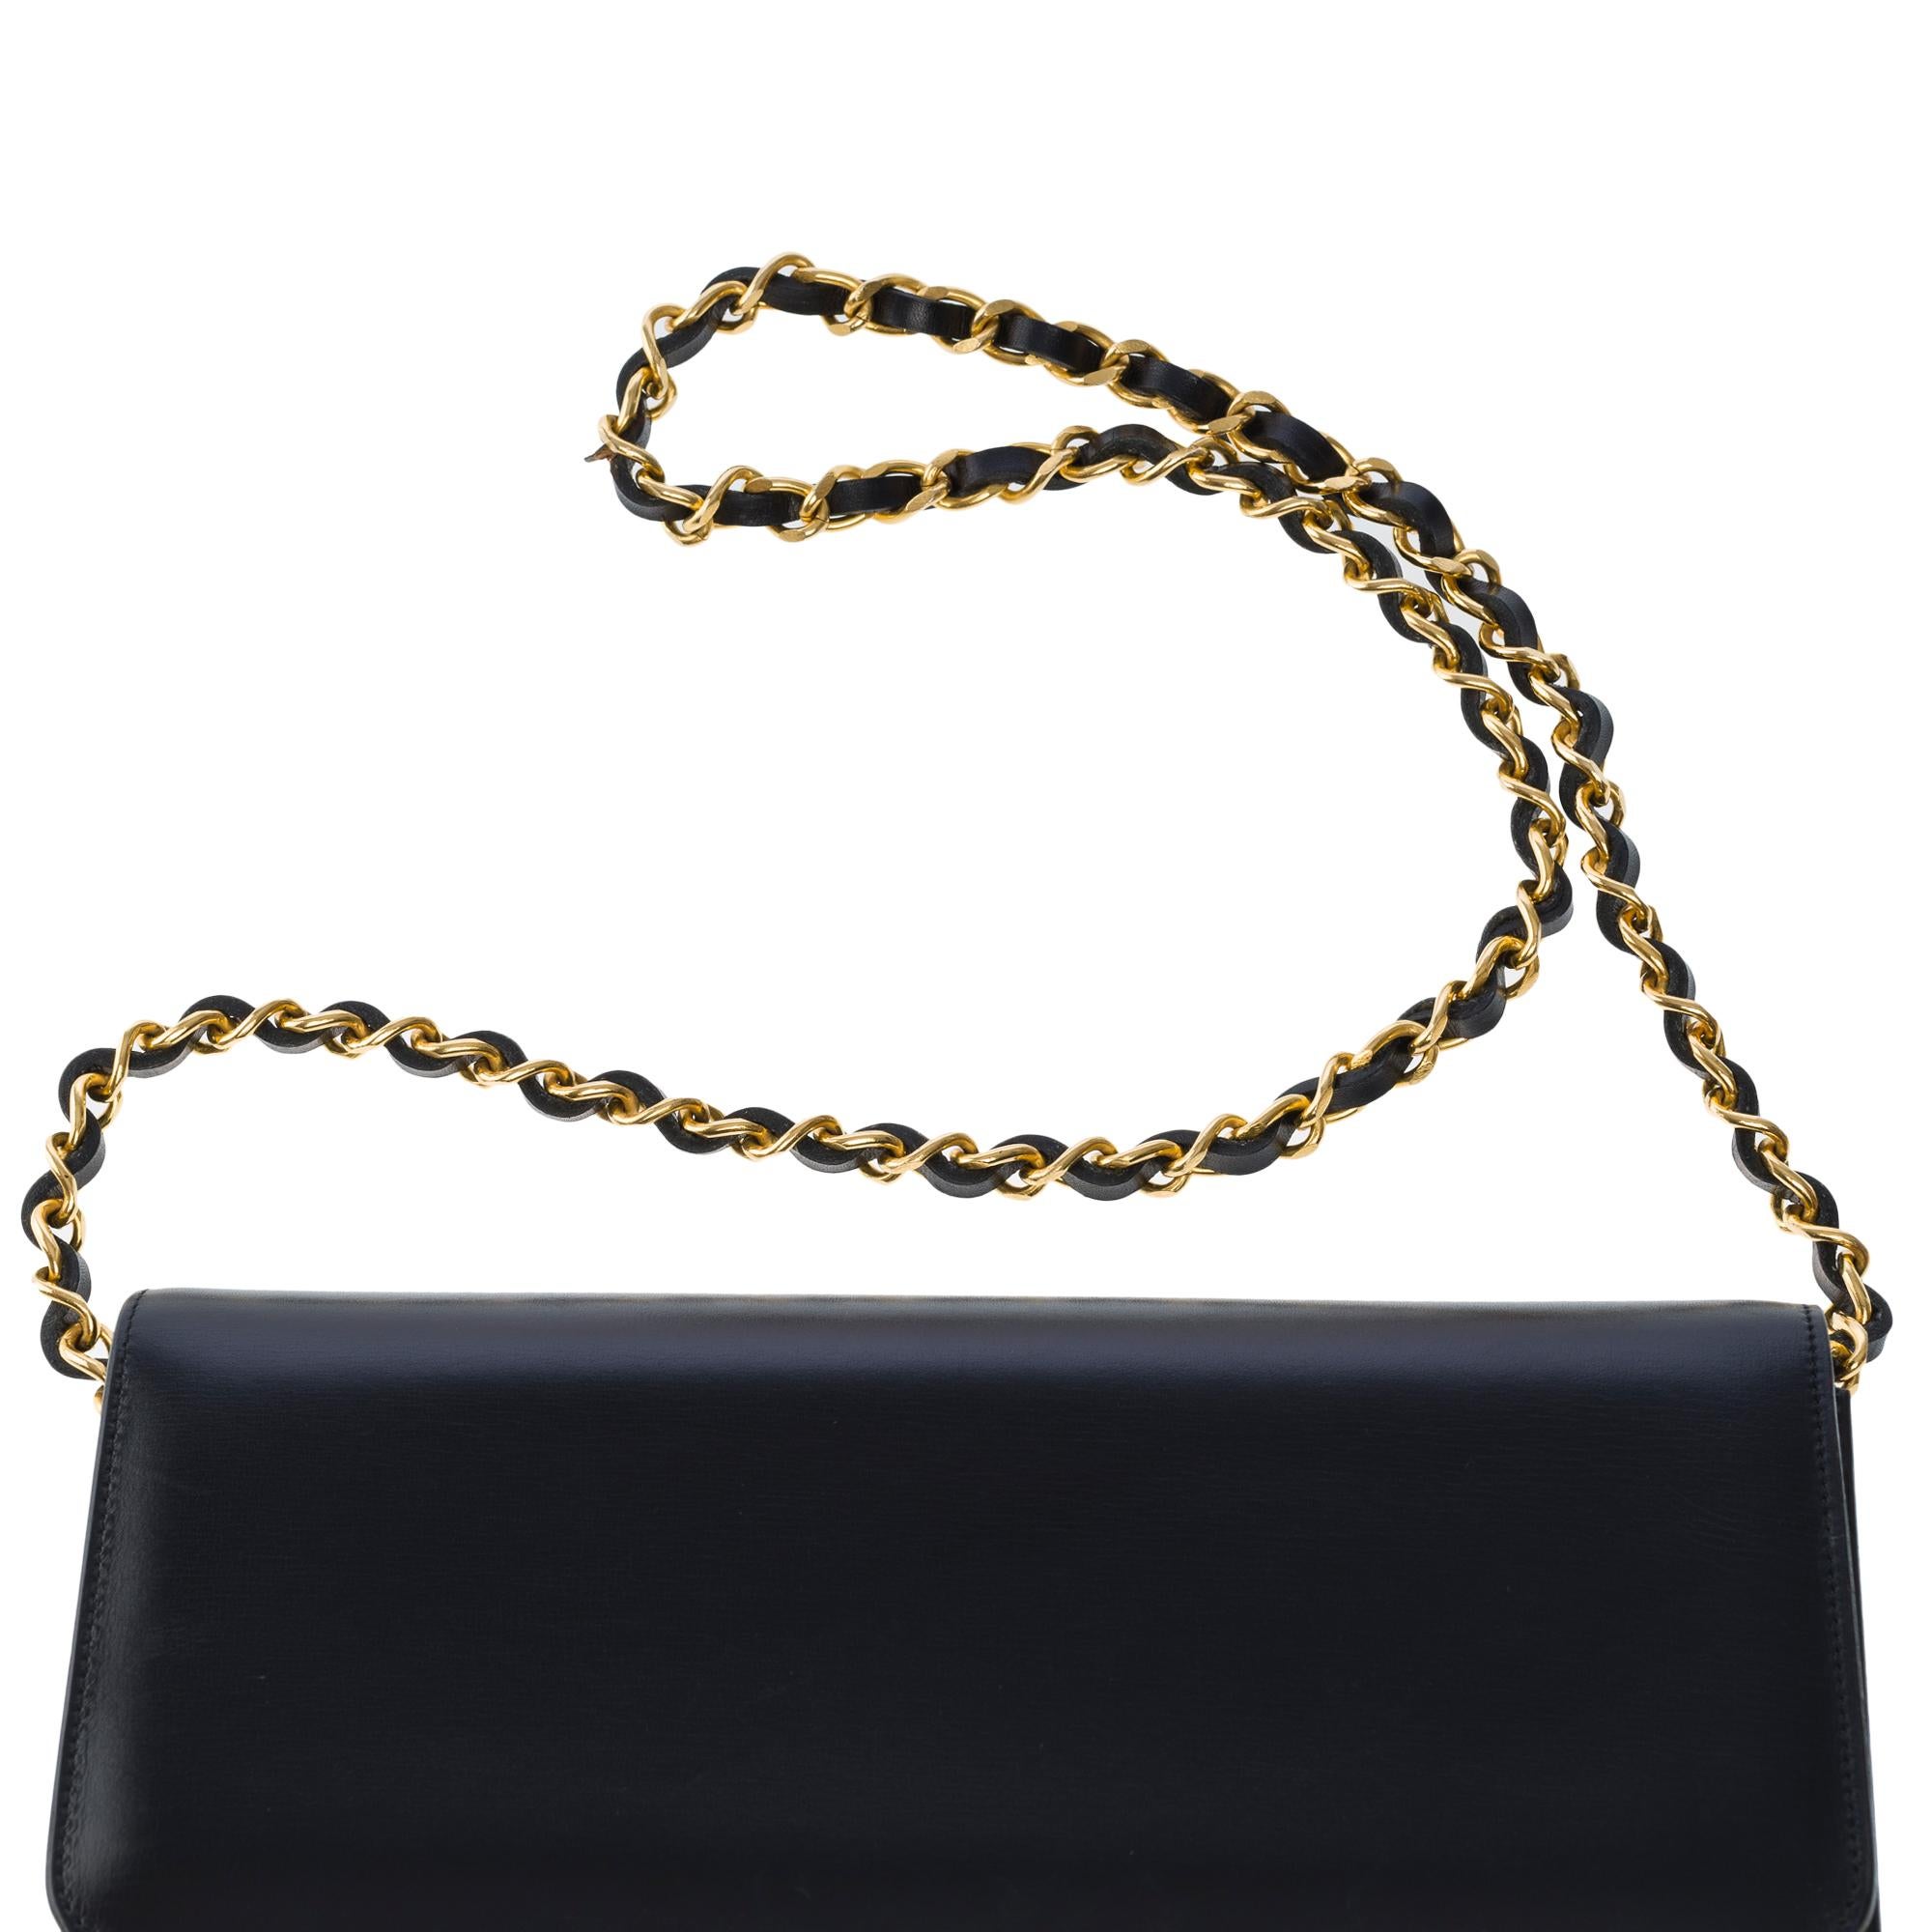 Gorgeous Chanel Classic shoulder flap bag in black box calfskin leather, GHW 4